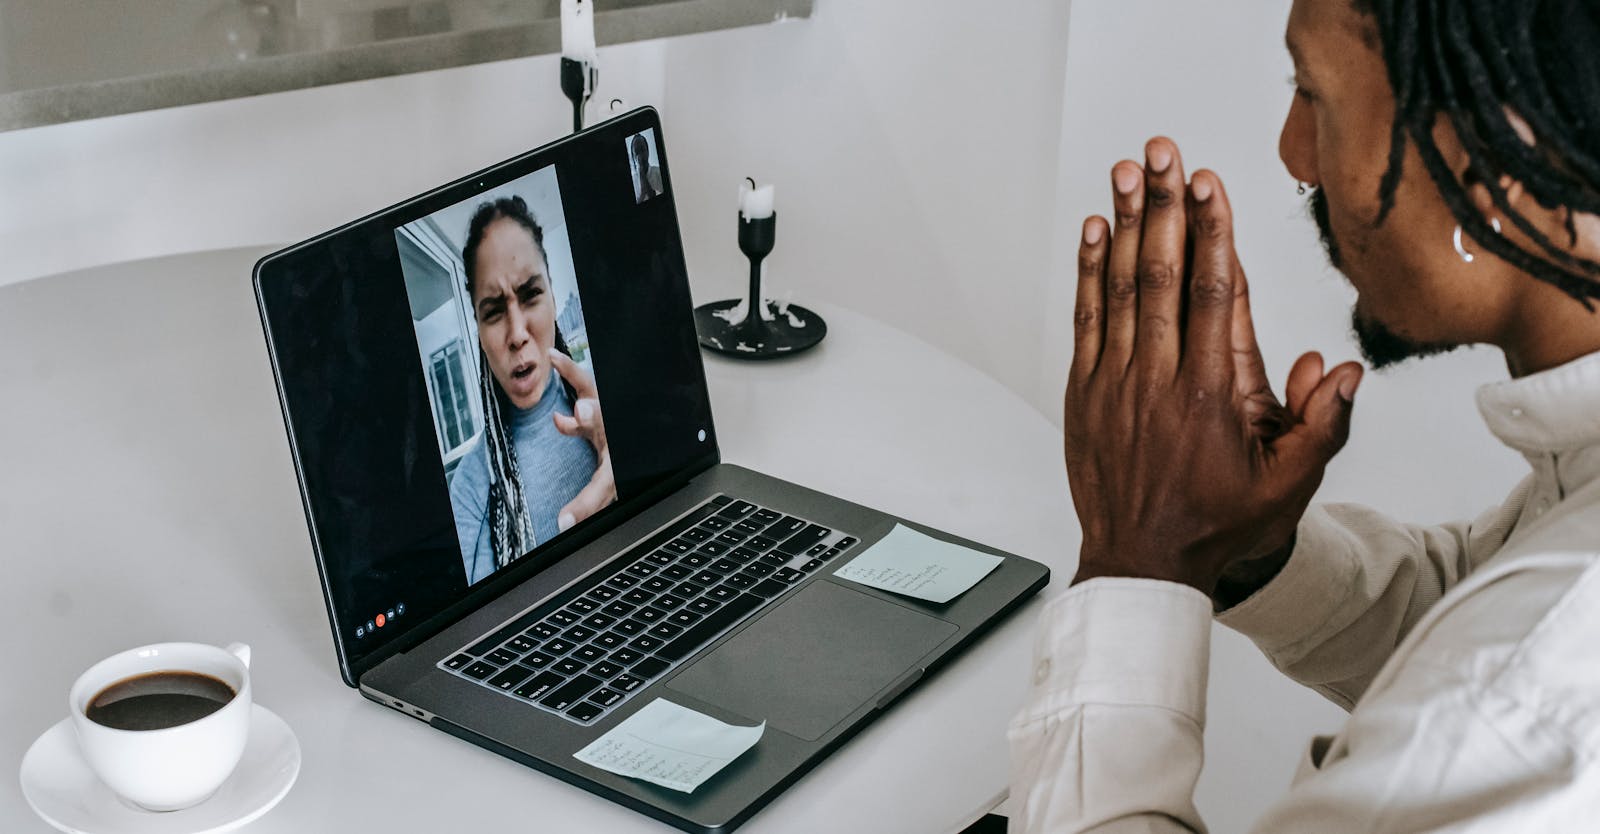 Anxious misunderstanding African American couple having video call via laptop and arguing emotionally while going through relationships crisis